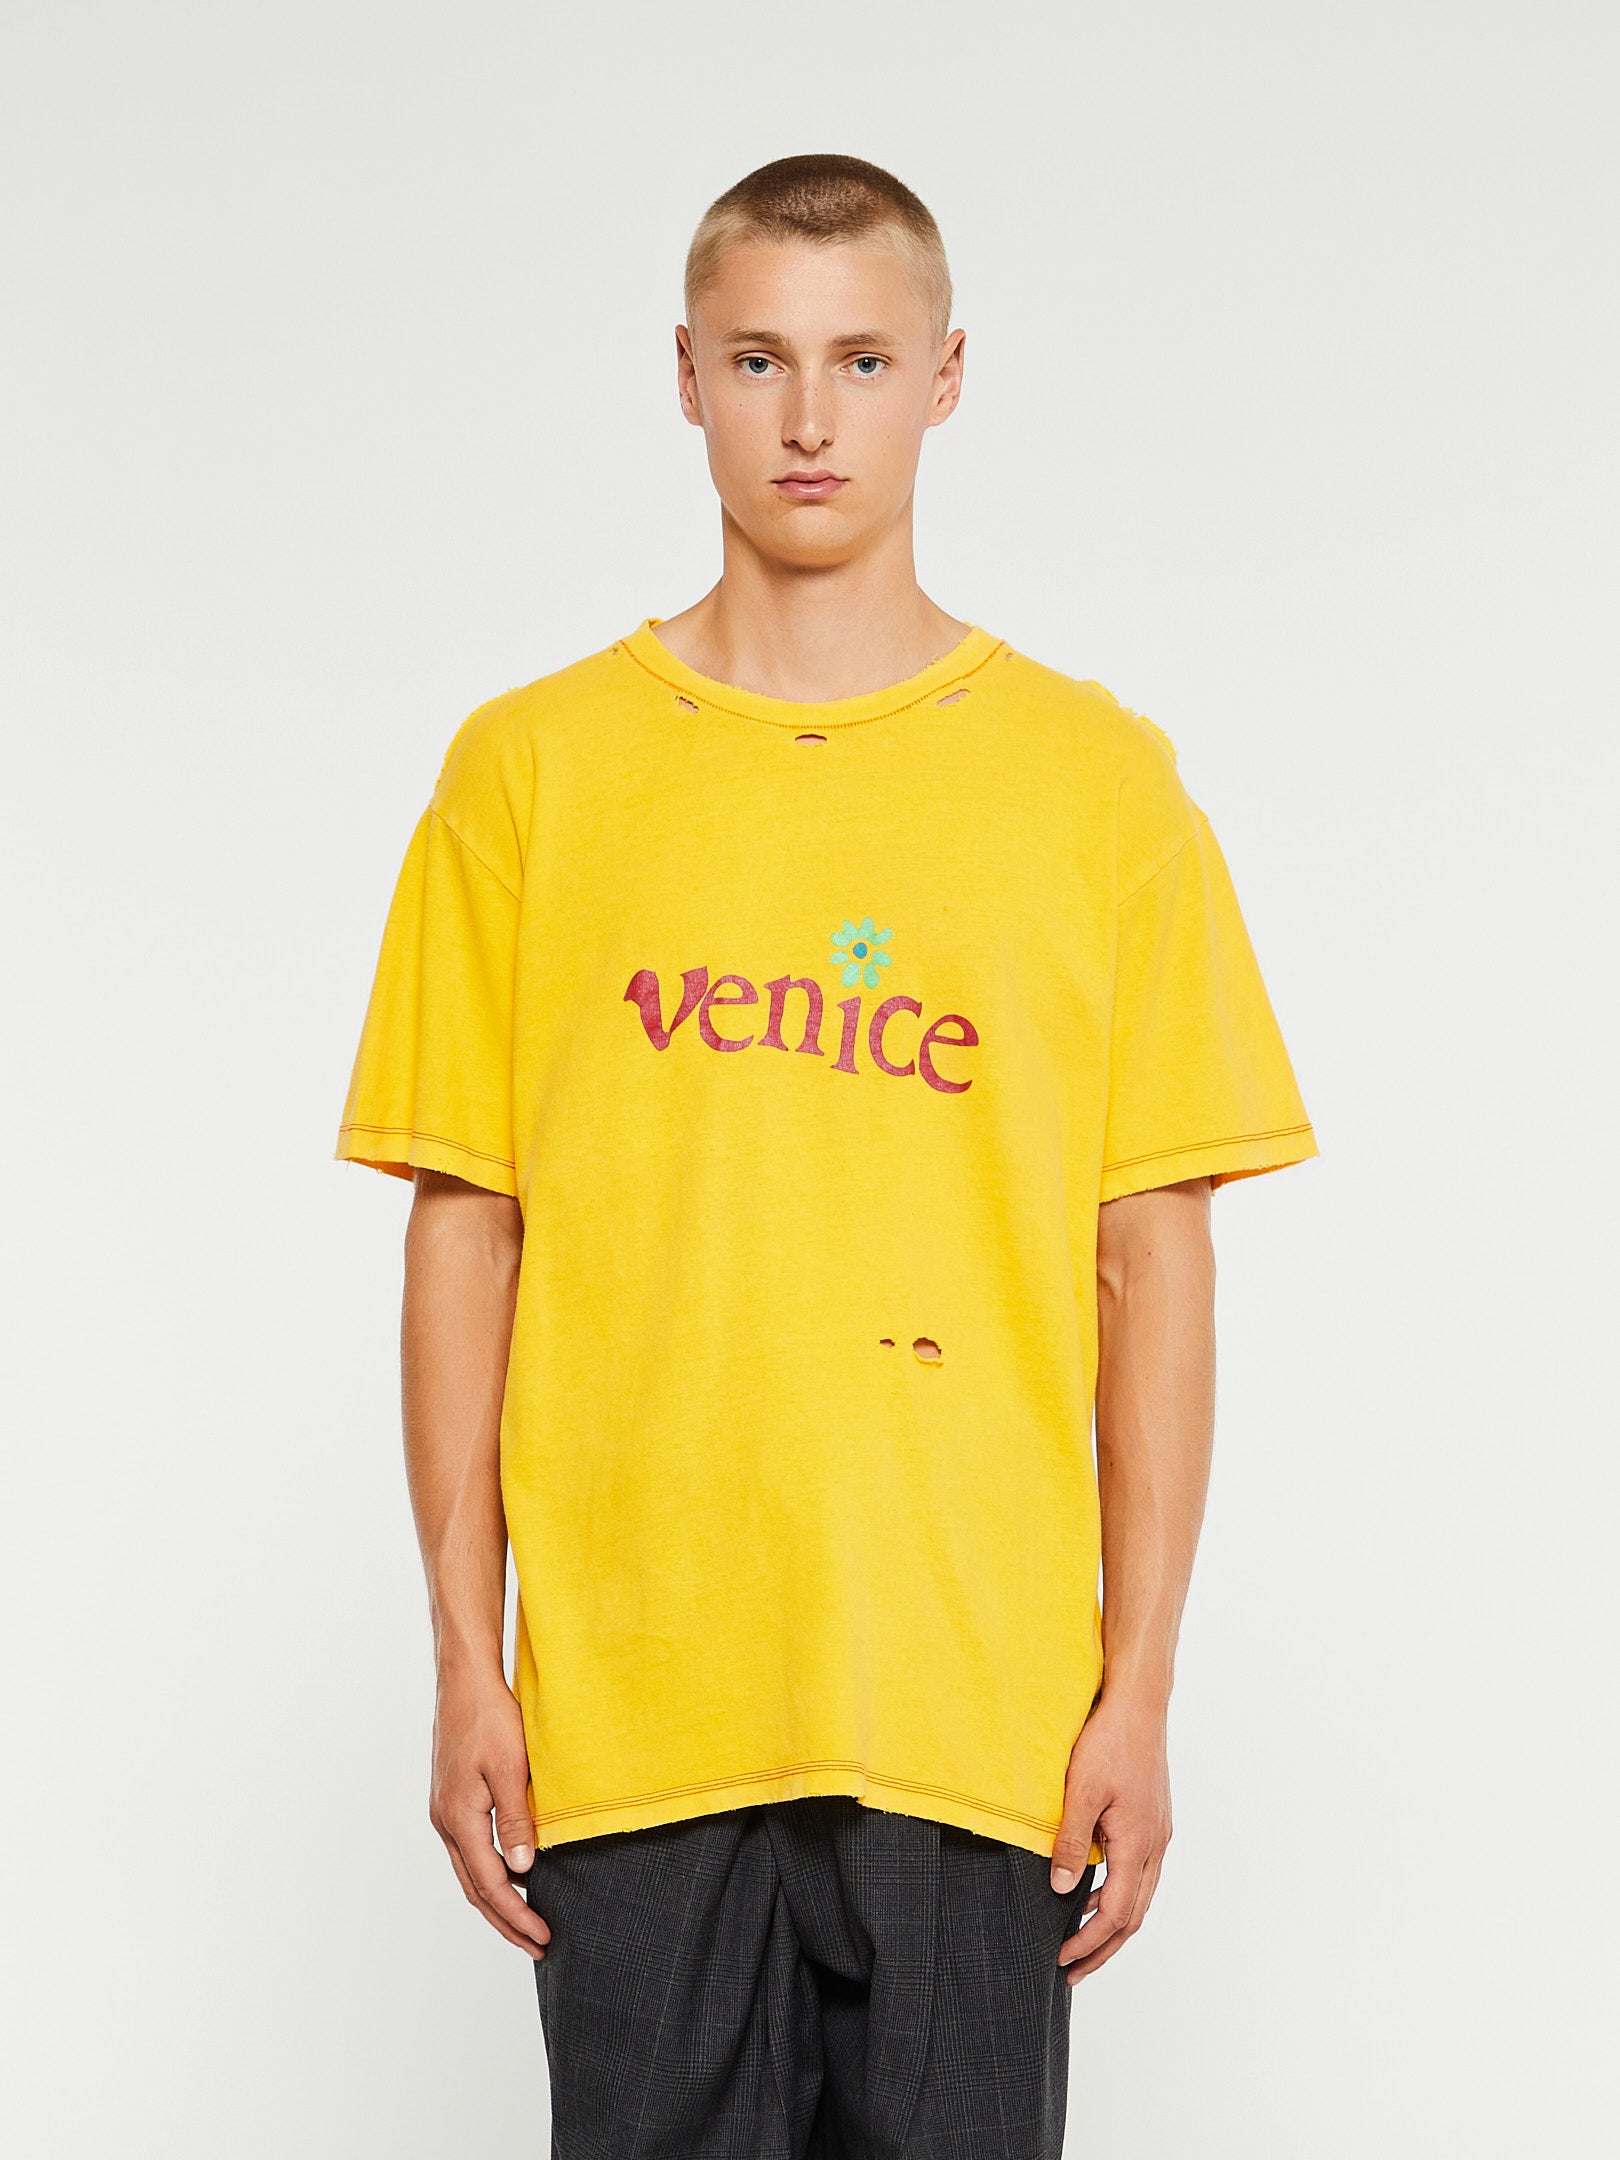 ERL - Venice T-shirt in Yellow